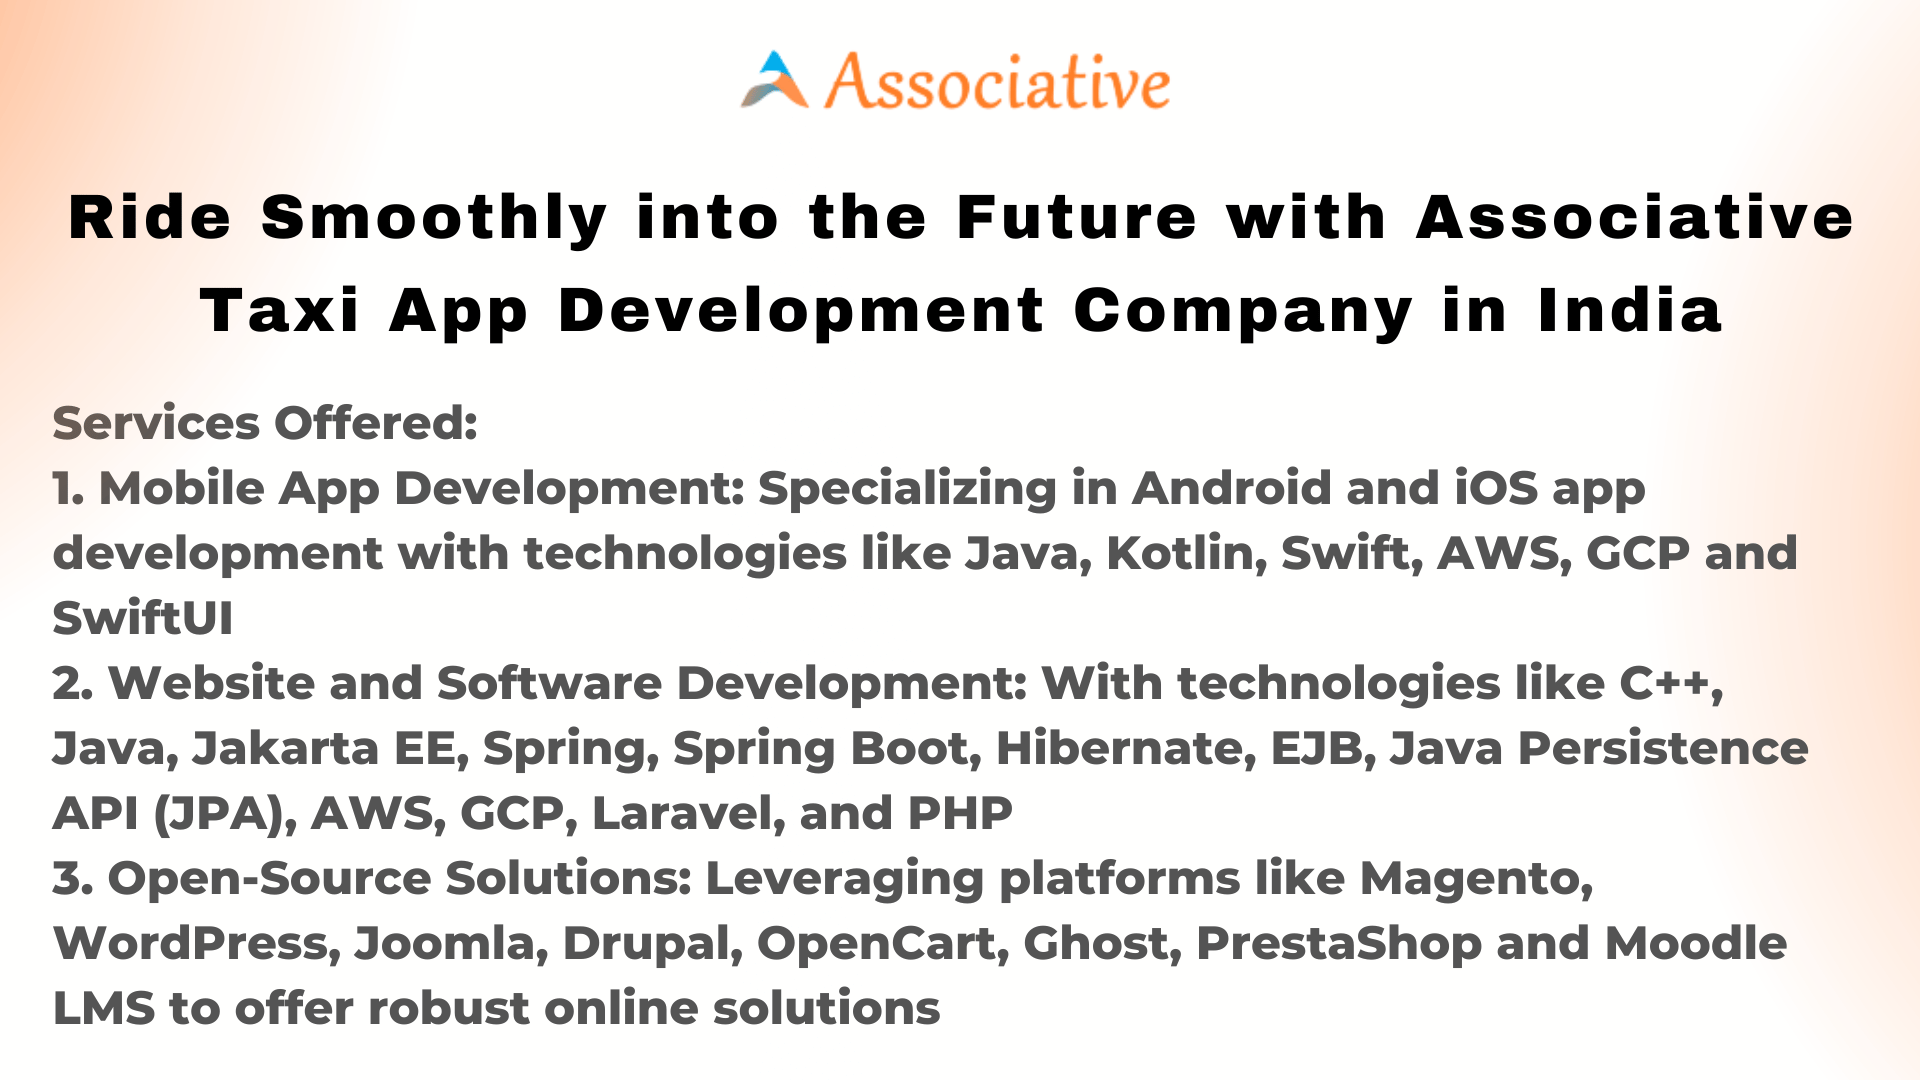 Ride Smoothly into the Future with Associative Taxi App Development Company in India